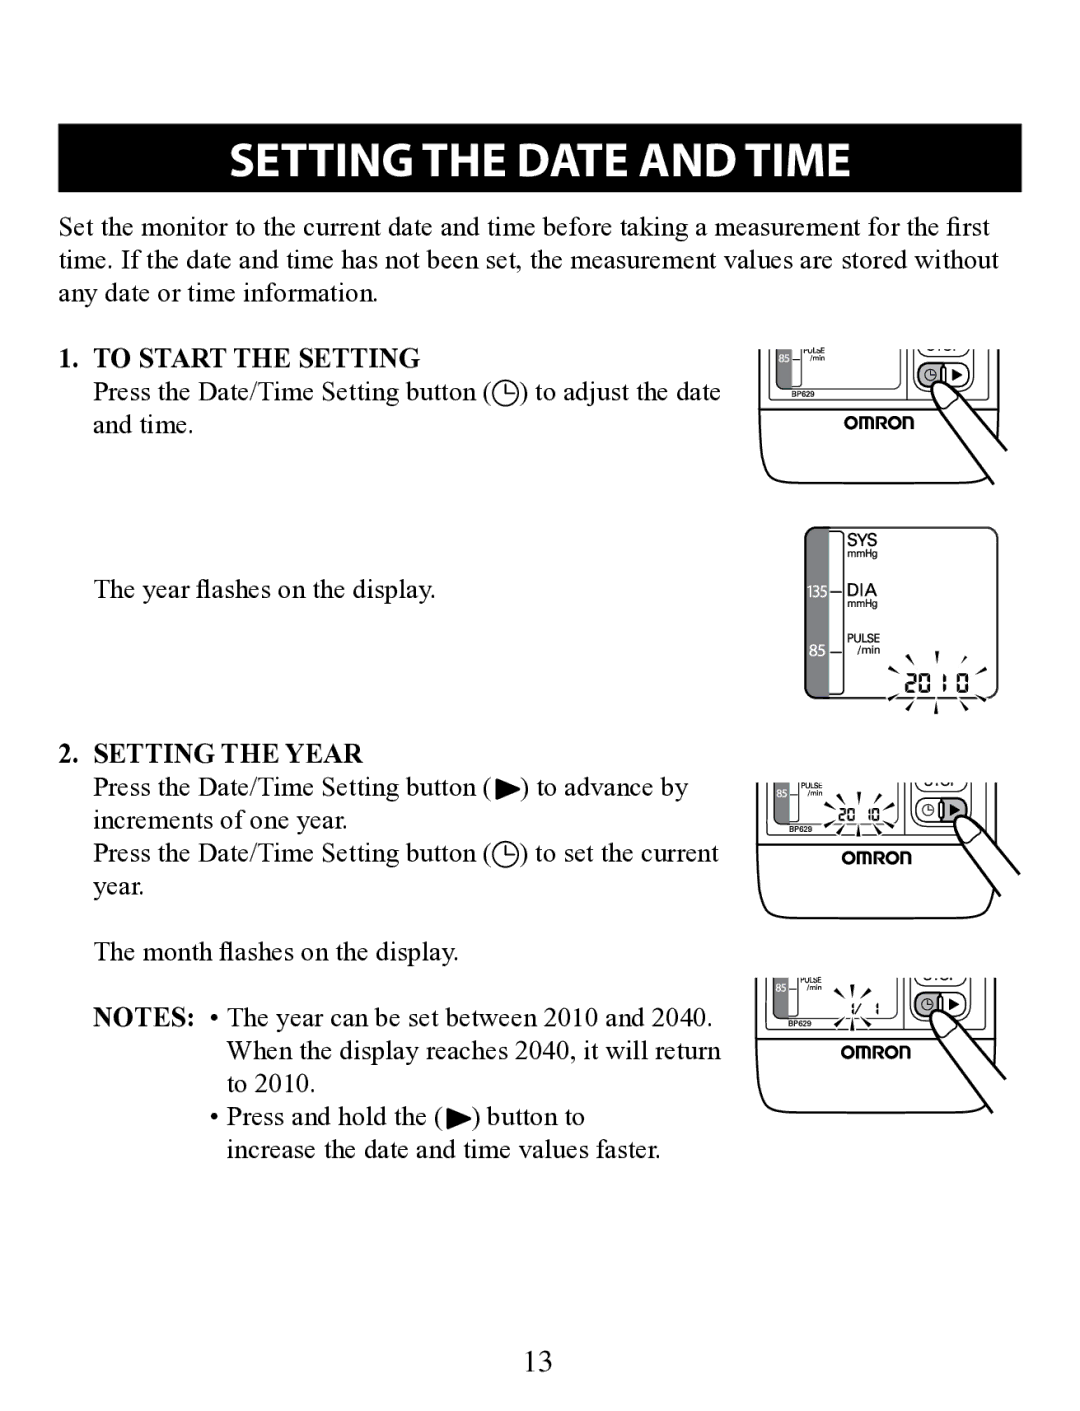 Omron Healthcare BP629 instruction manual Setting the Date and Time, To Start the Setting, Setting the Year 